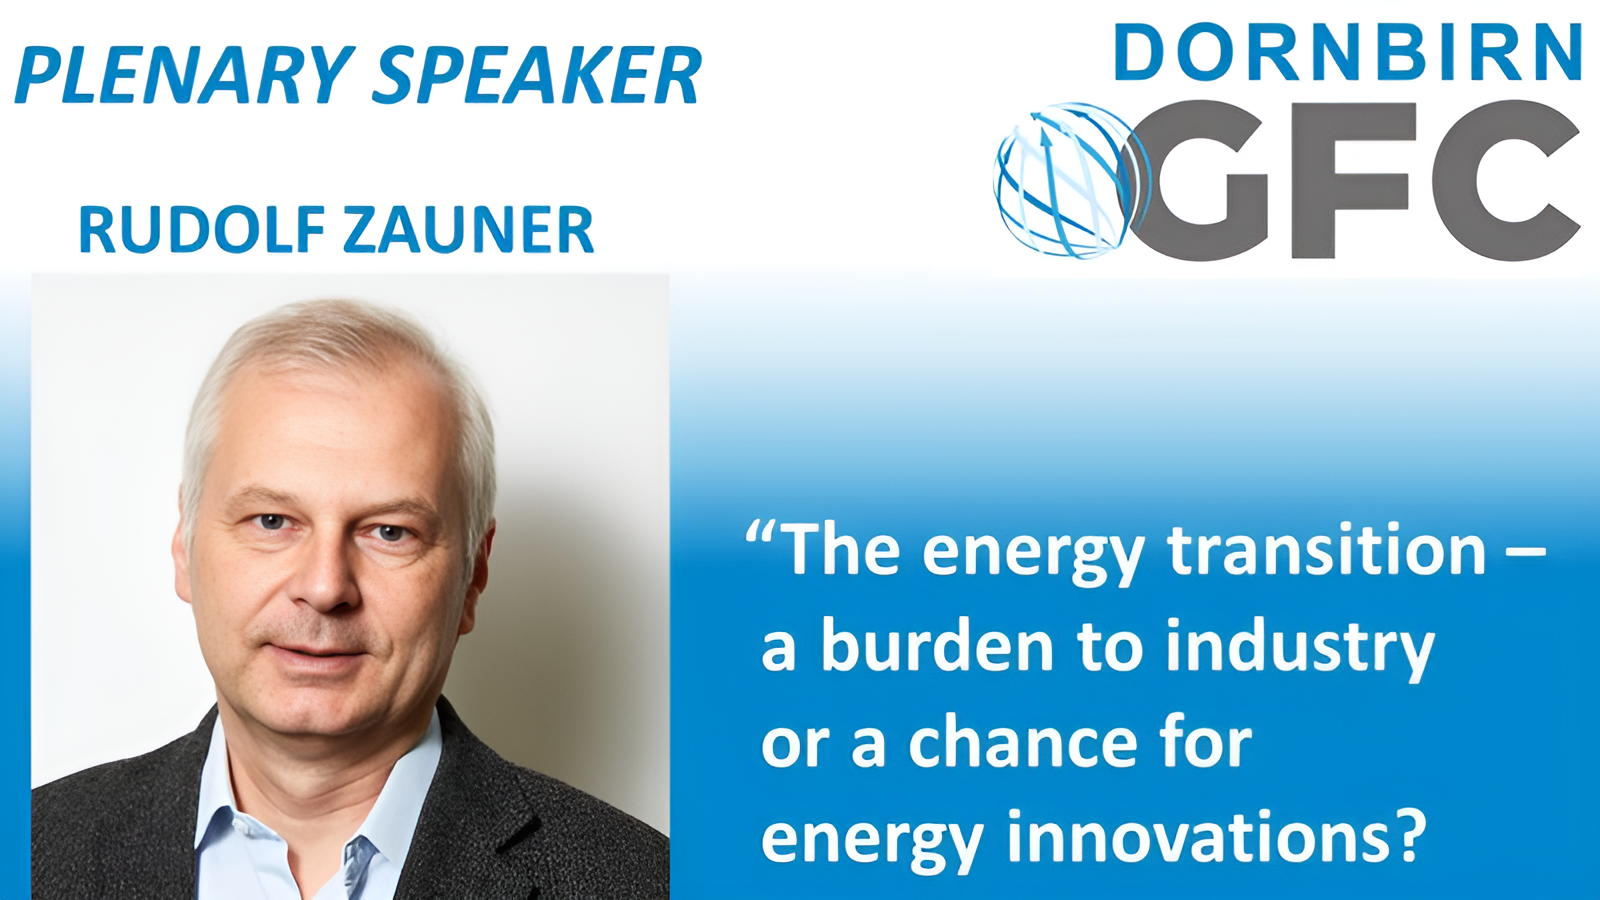 The Energy Transition: A Burden to Industry or a Chance for Energy Innovations?